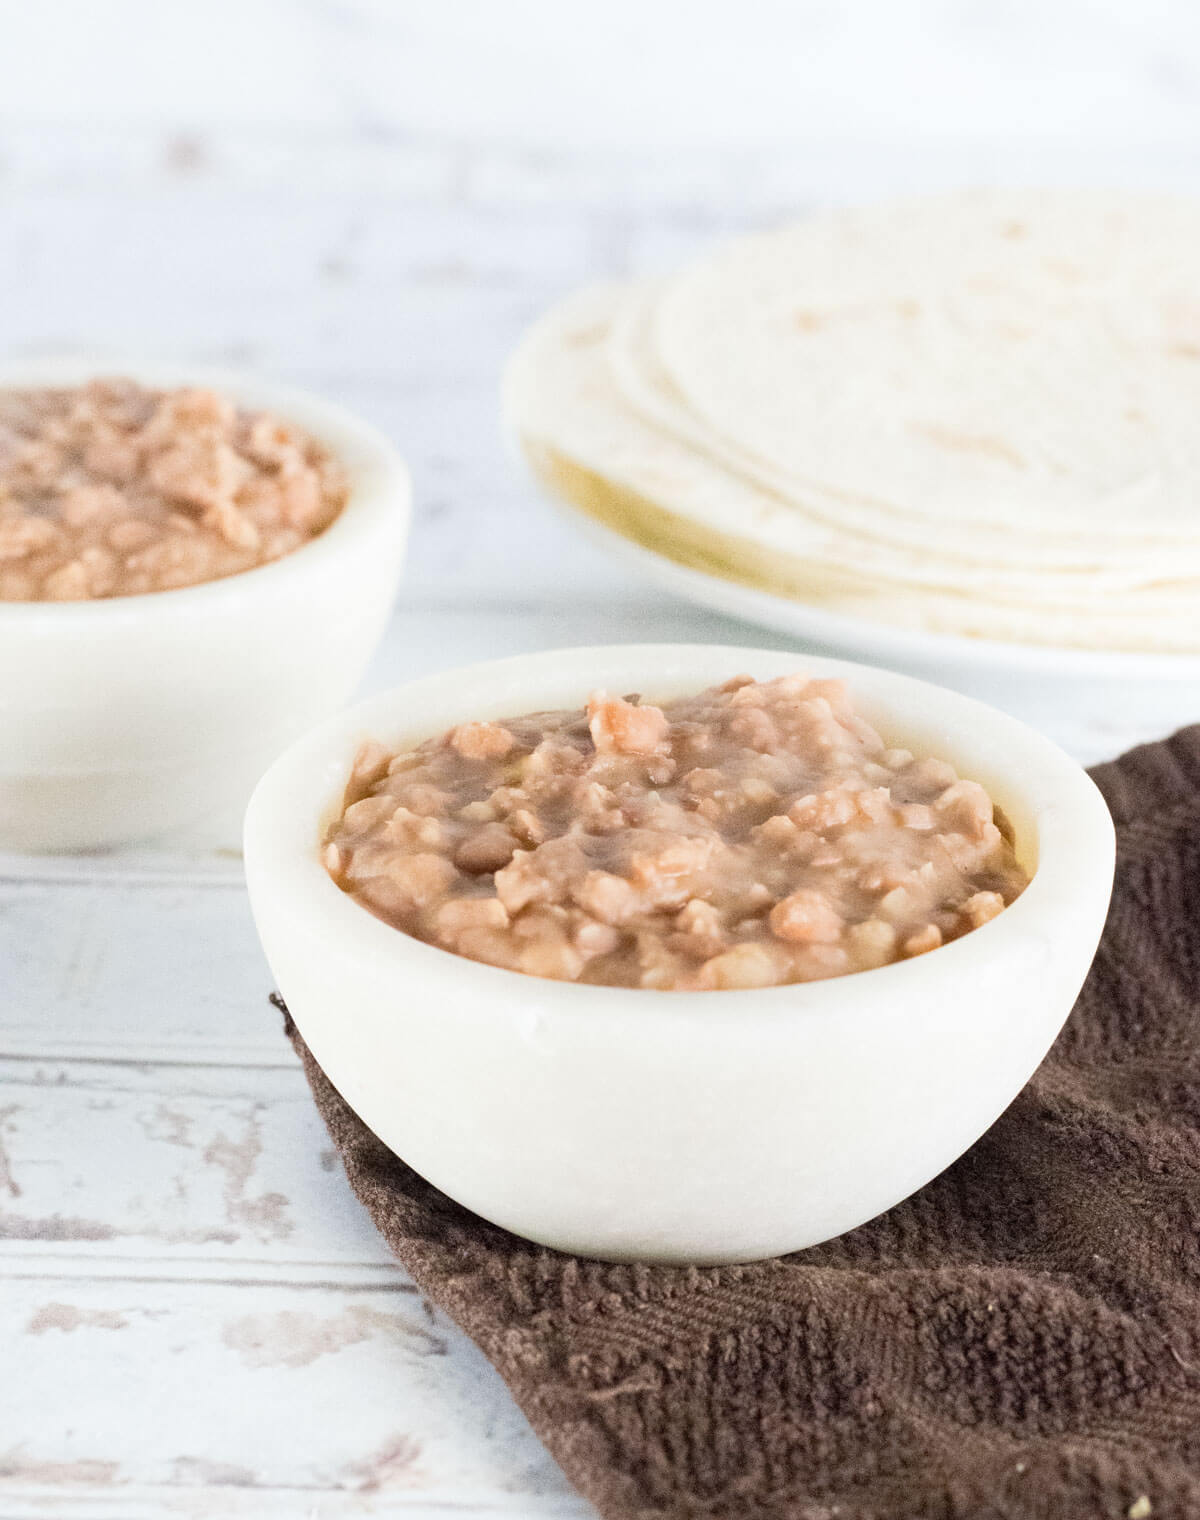 Refried beans with lard in bowl with tortillas.